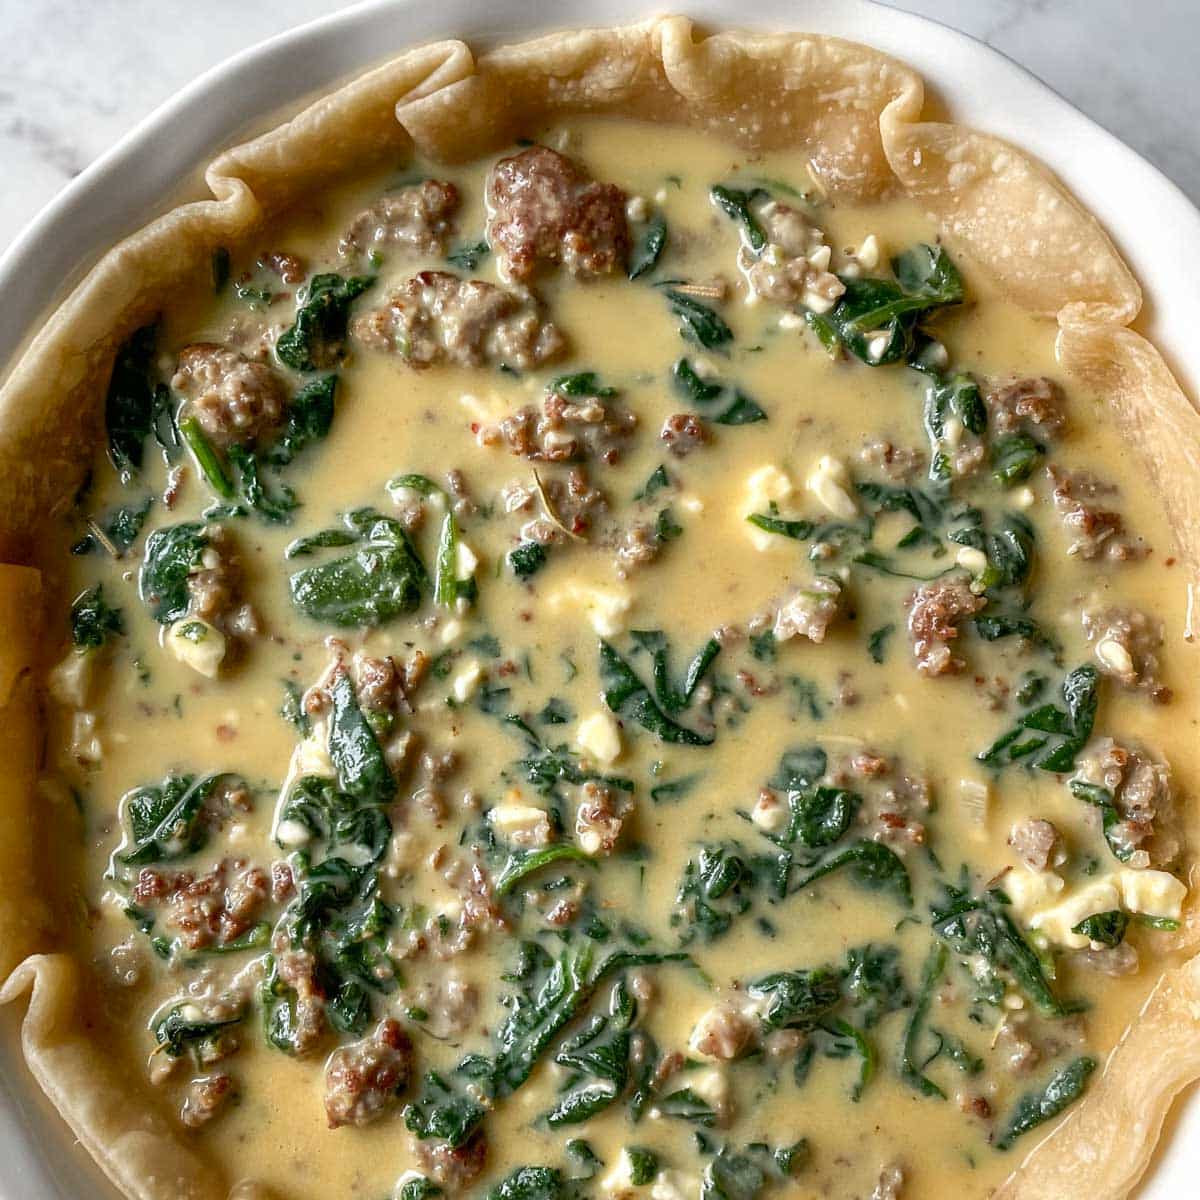 The filling is added to the quiche crust.